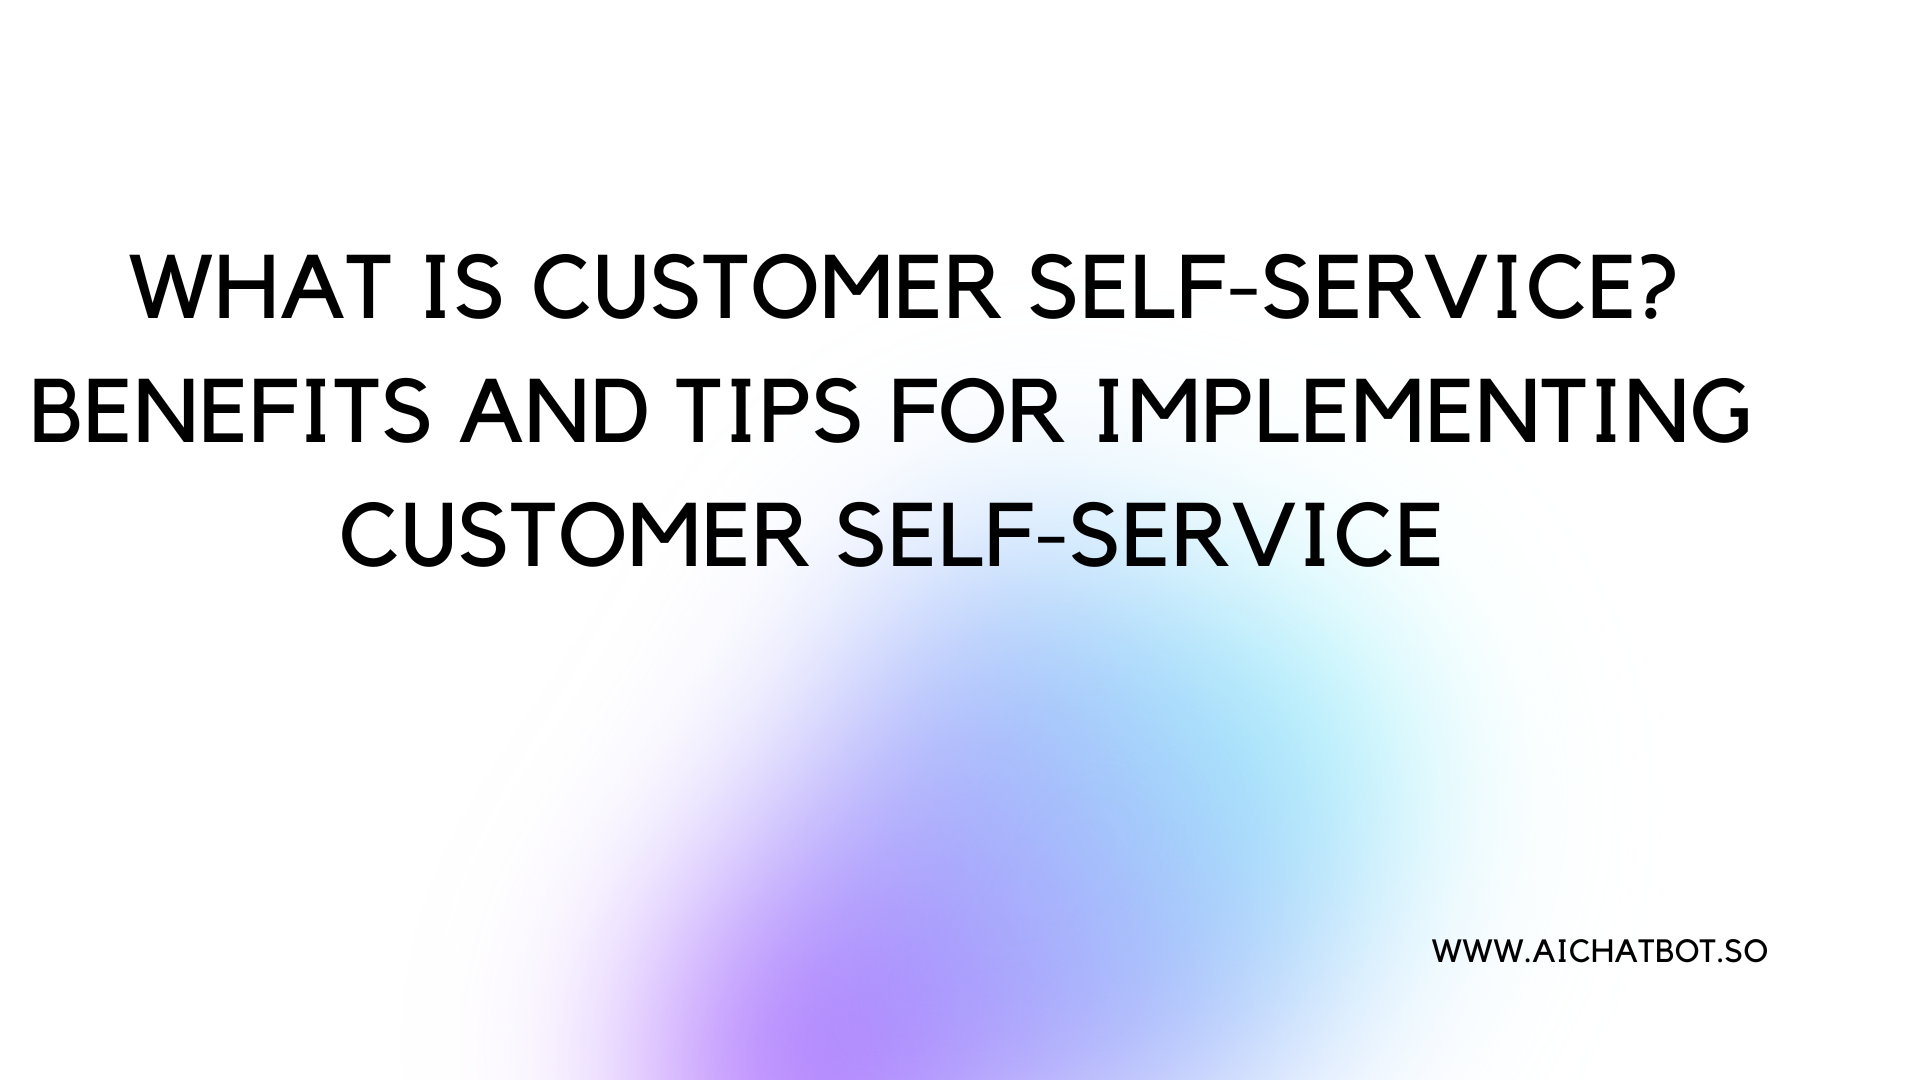 What Is Customer Self-Service Benefits and Tips for Implementing Customer Self-Service